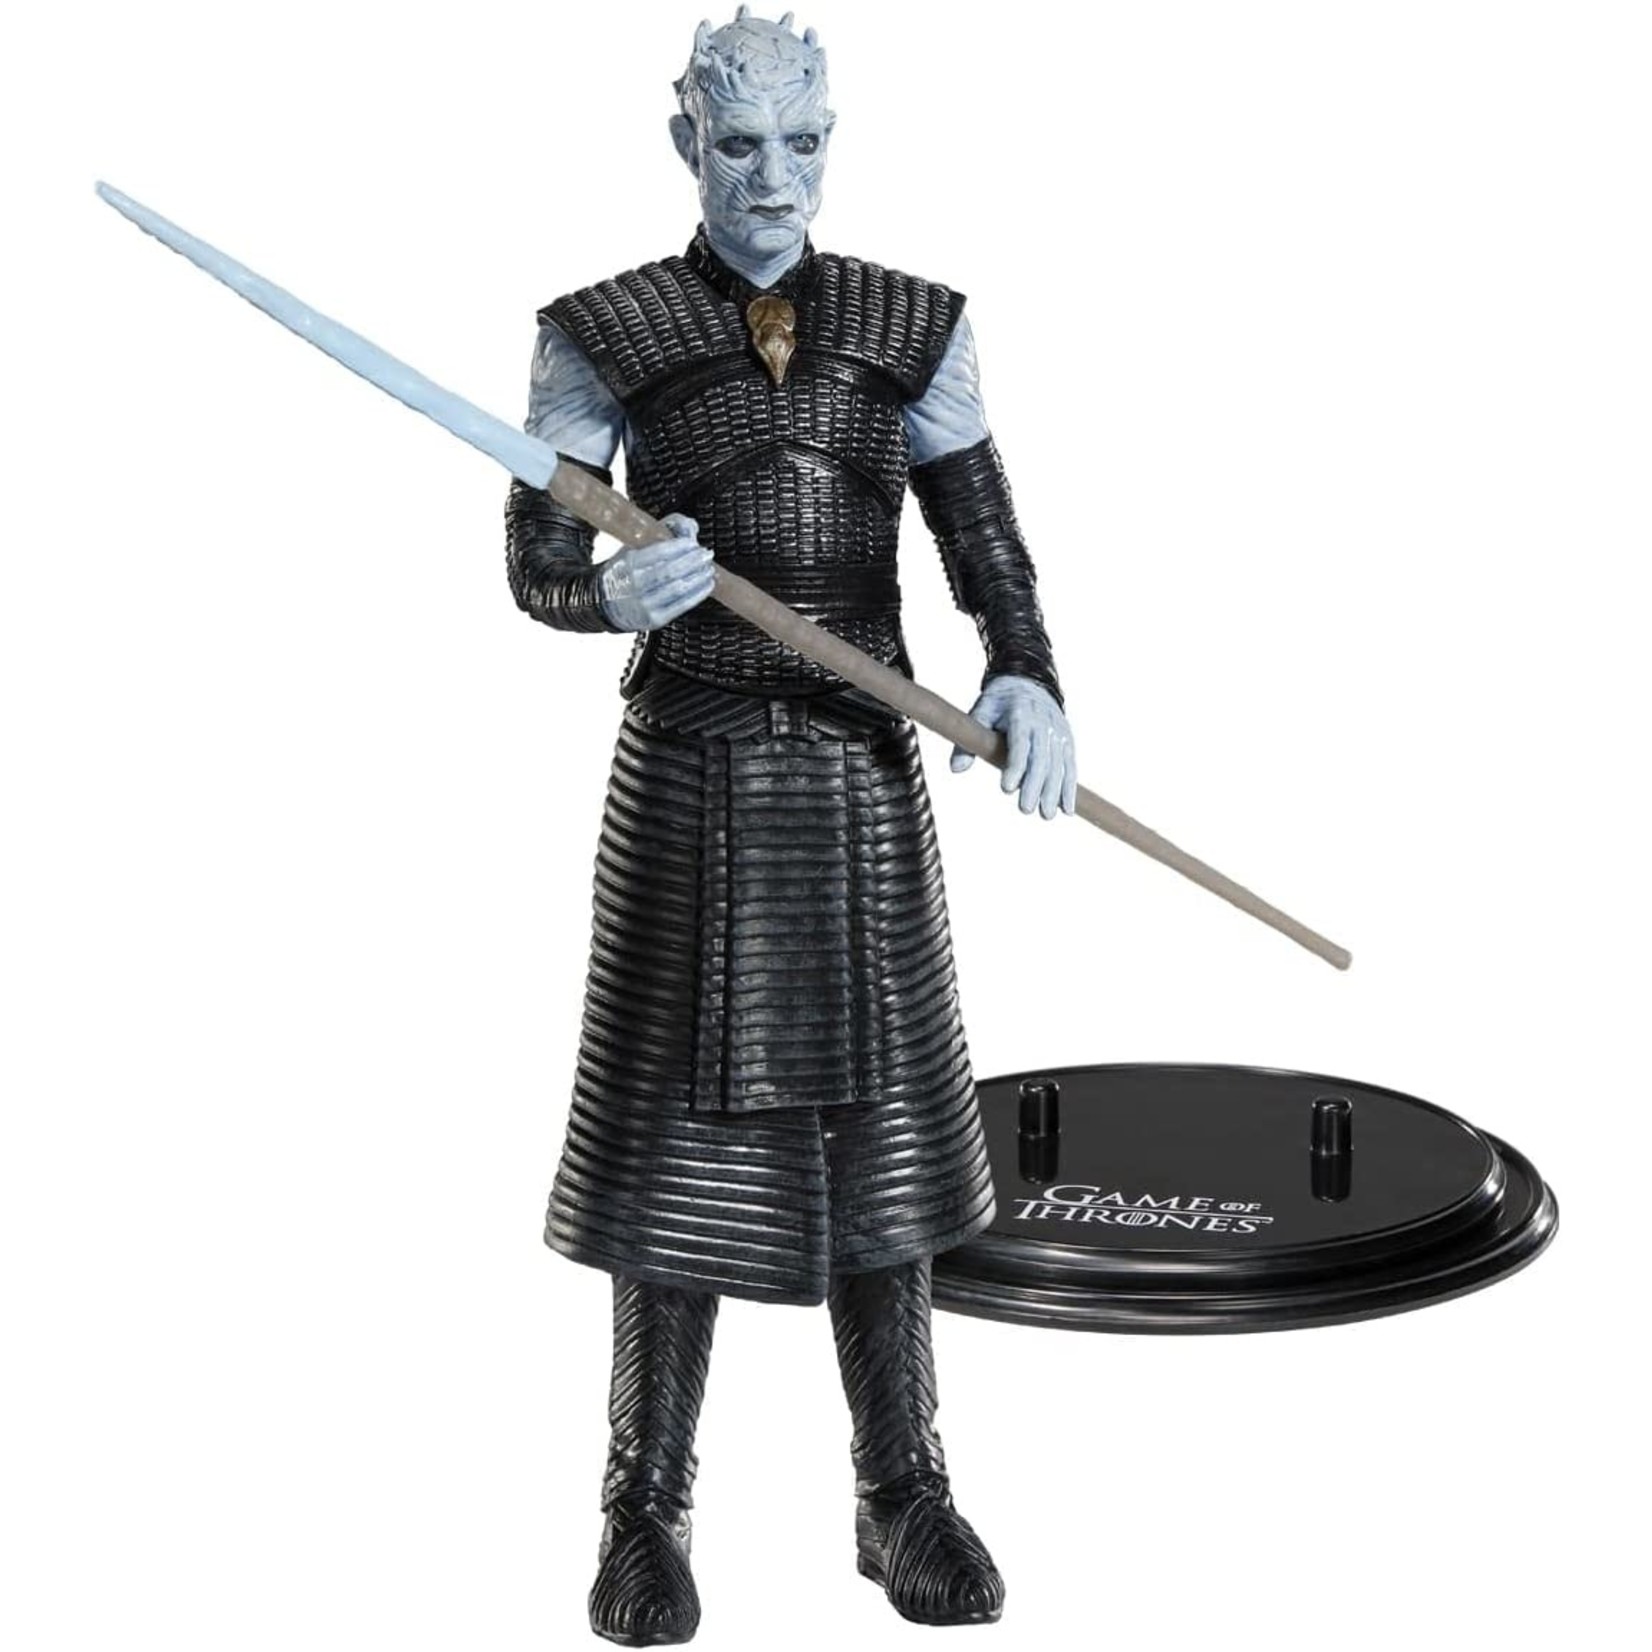 The Noble Collection The Noble Collection Bendyfigs Game of Thrones The Night King